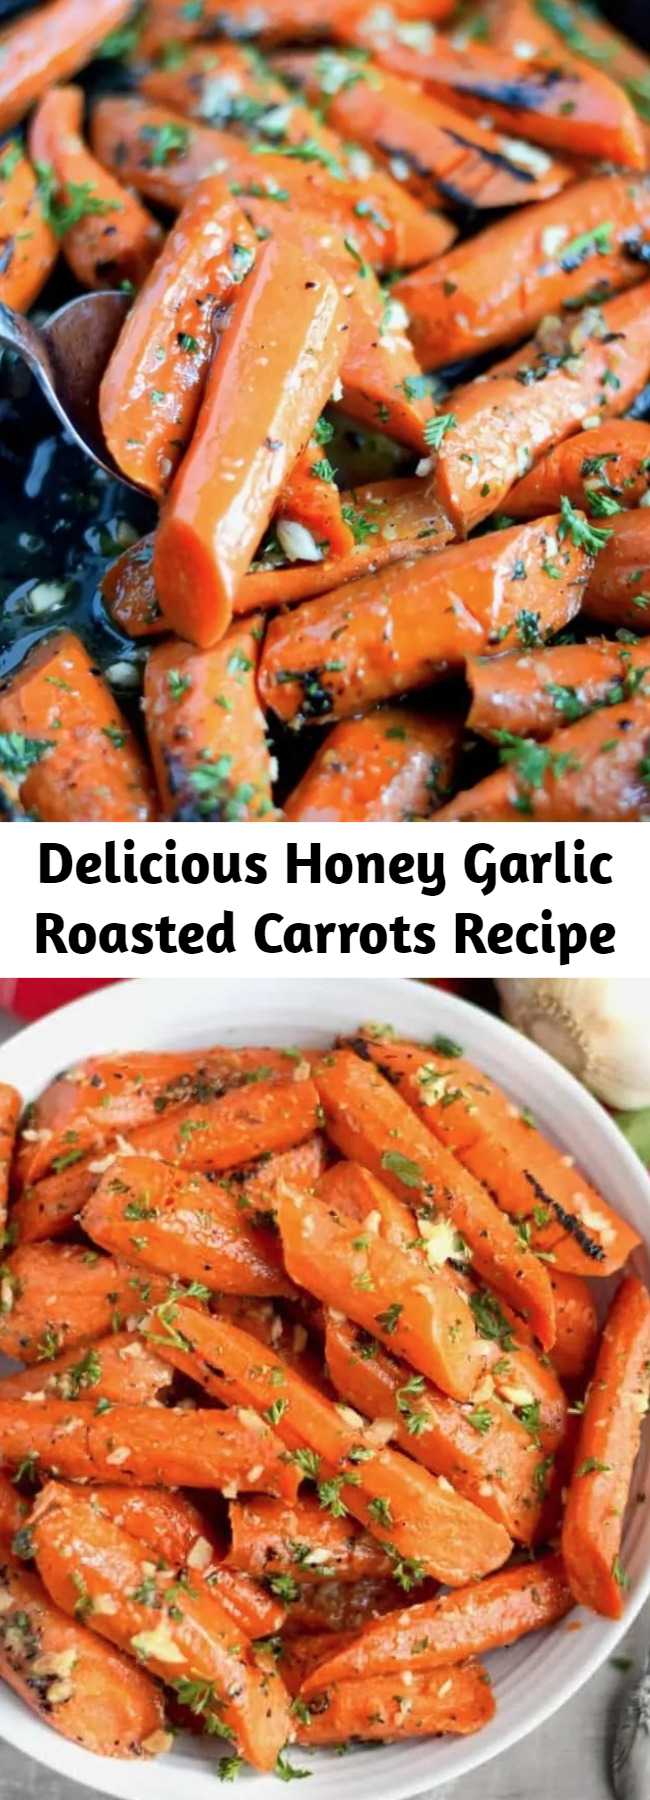 Delicious Honey Garlic Roasted Carrots Recipe - Honey Garlic Roasted Carrots are delicious, tender and tossed in a sweet honey garlic butter sauce. #carrots #roastedveggie #sidedish